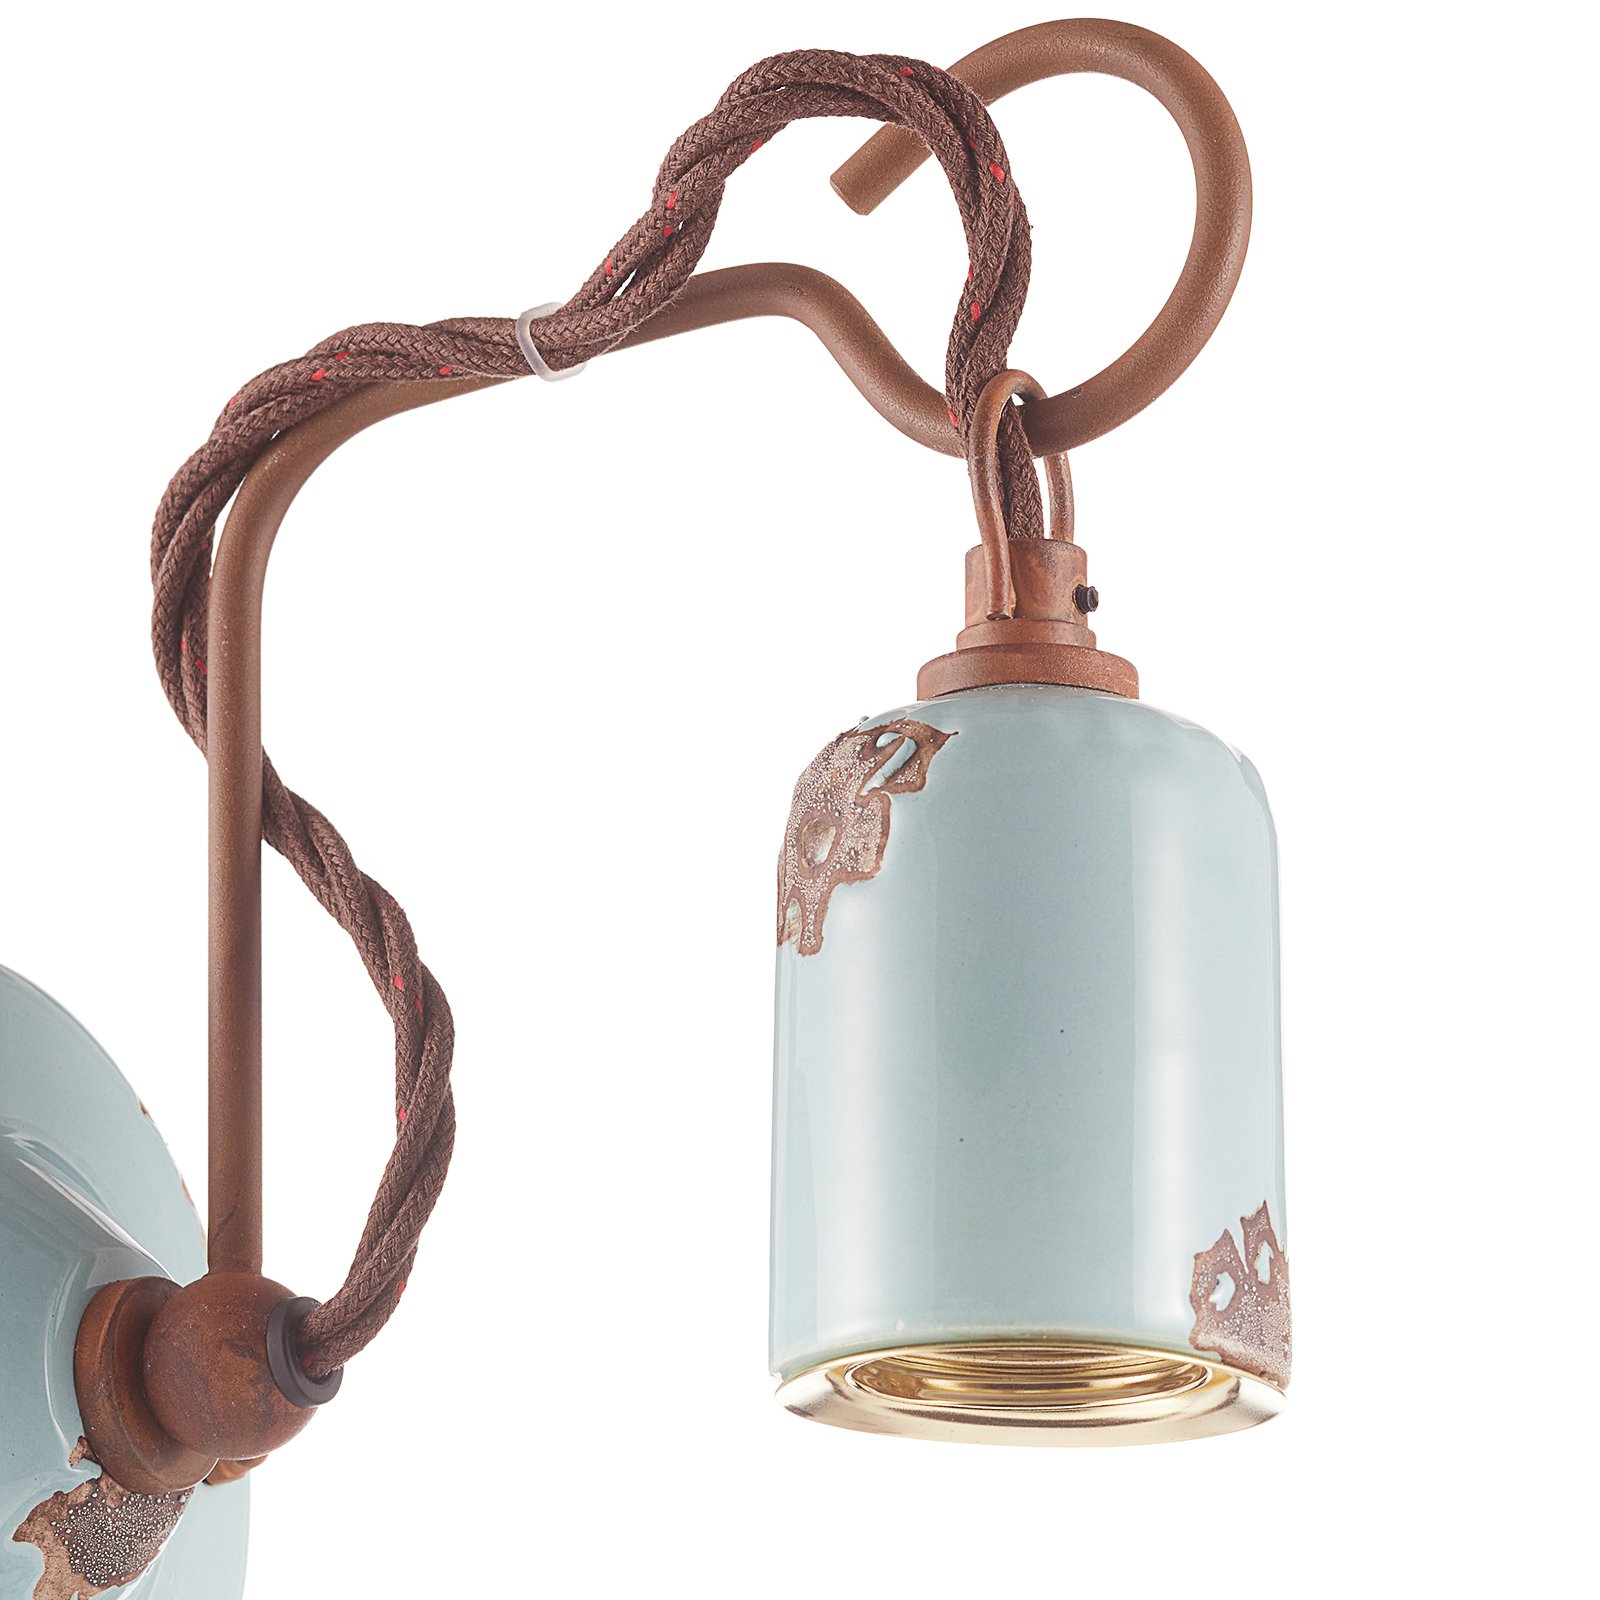 Vintage-style wall light C665 turquoise